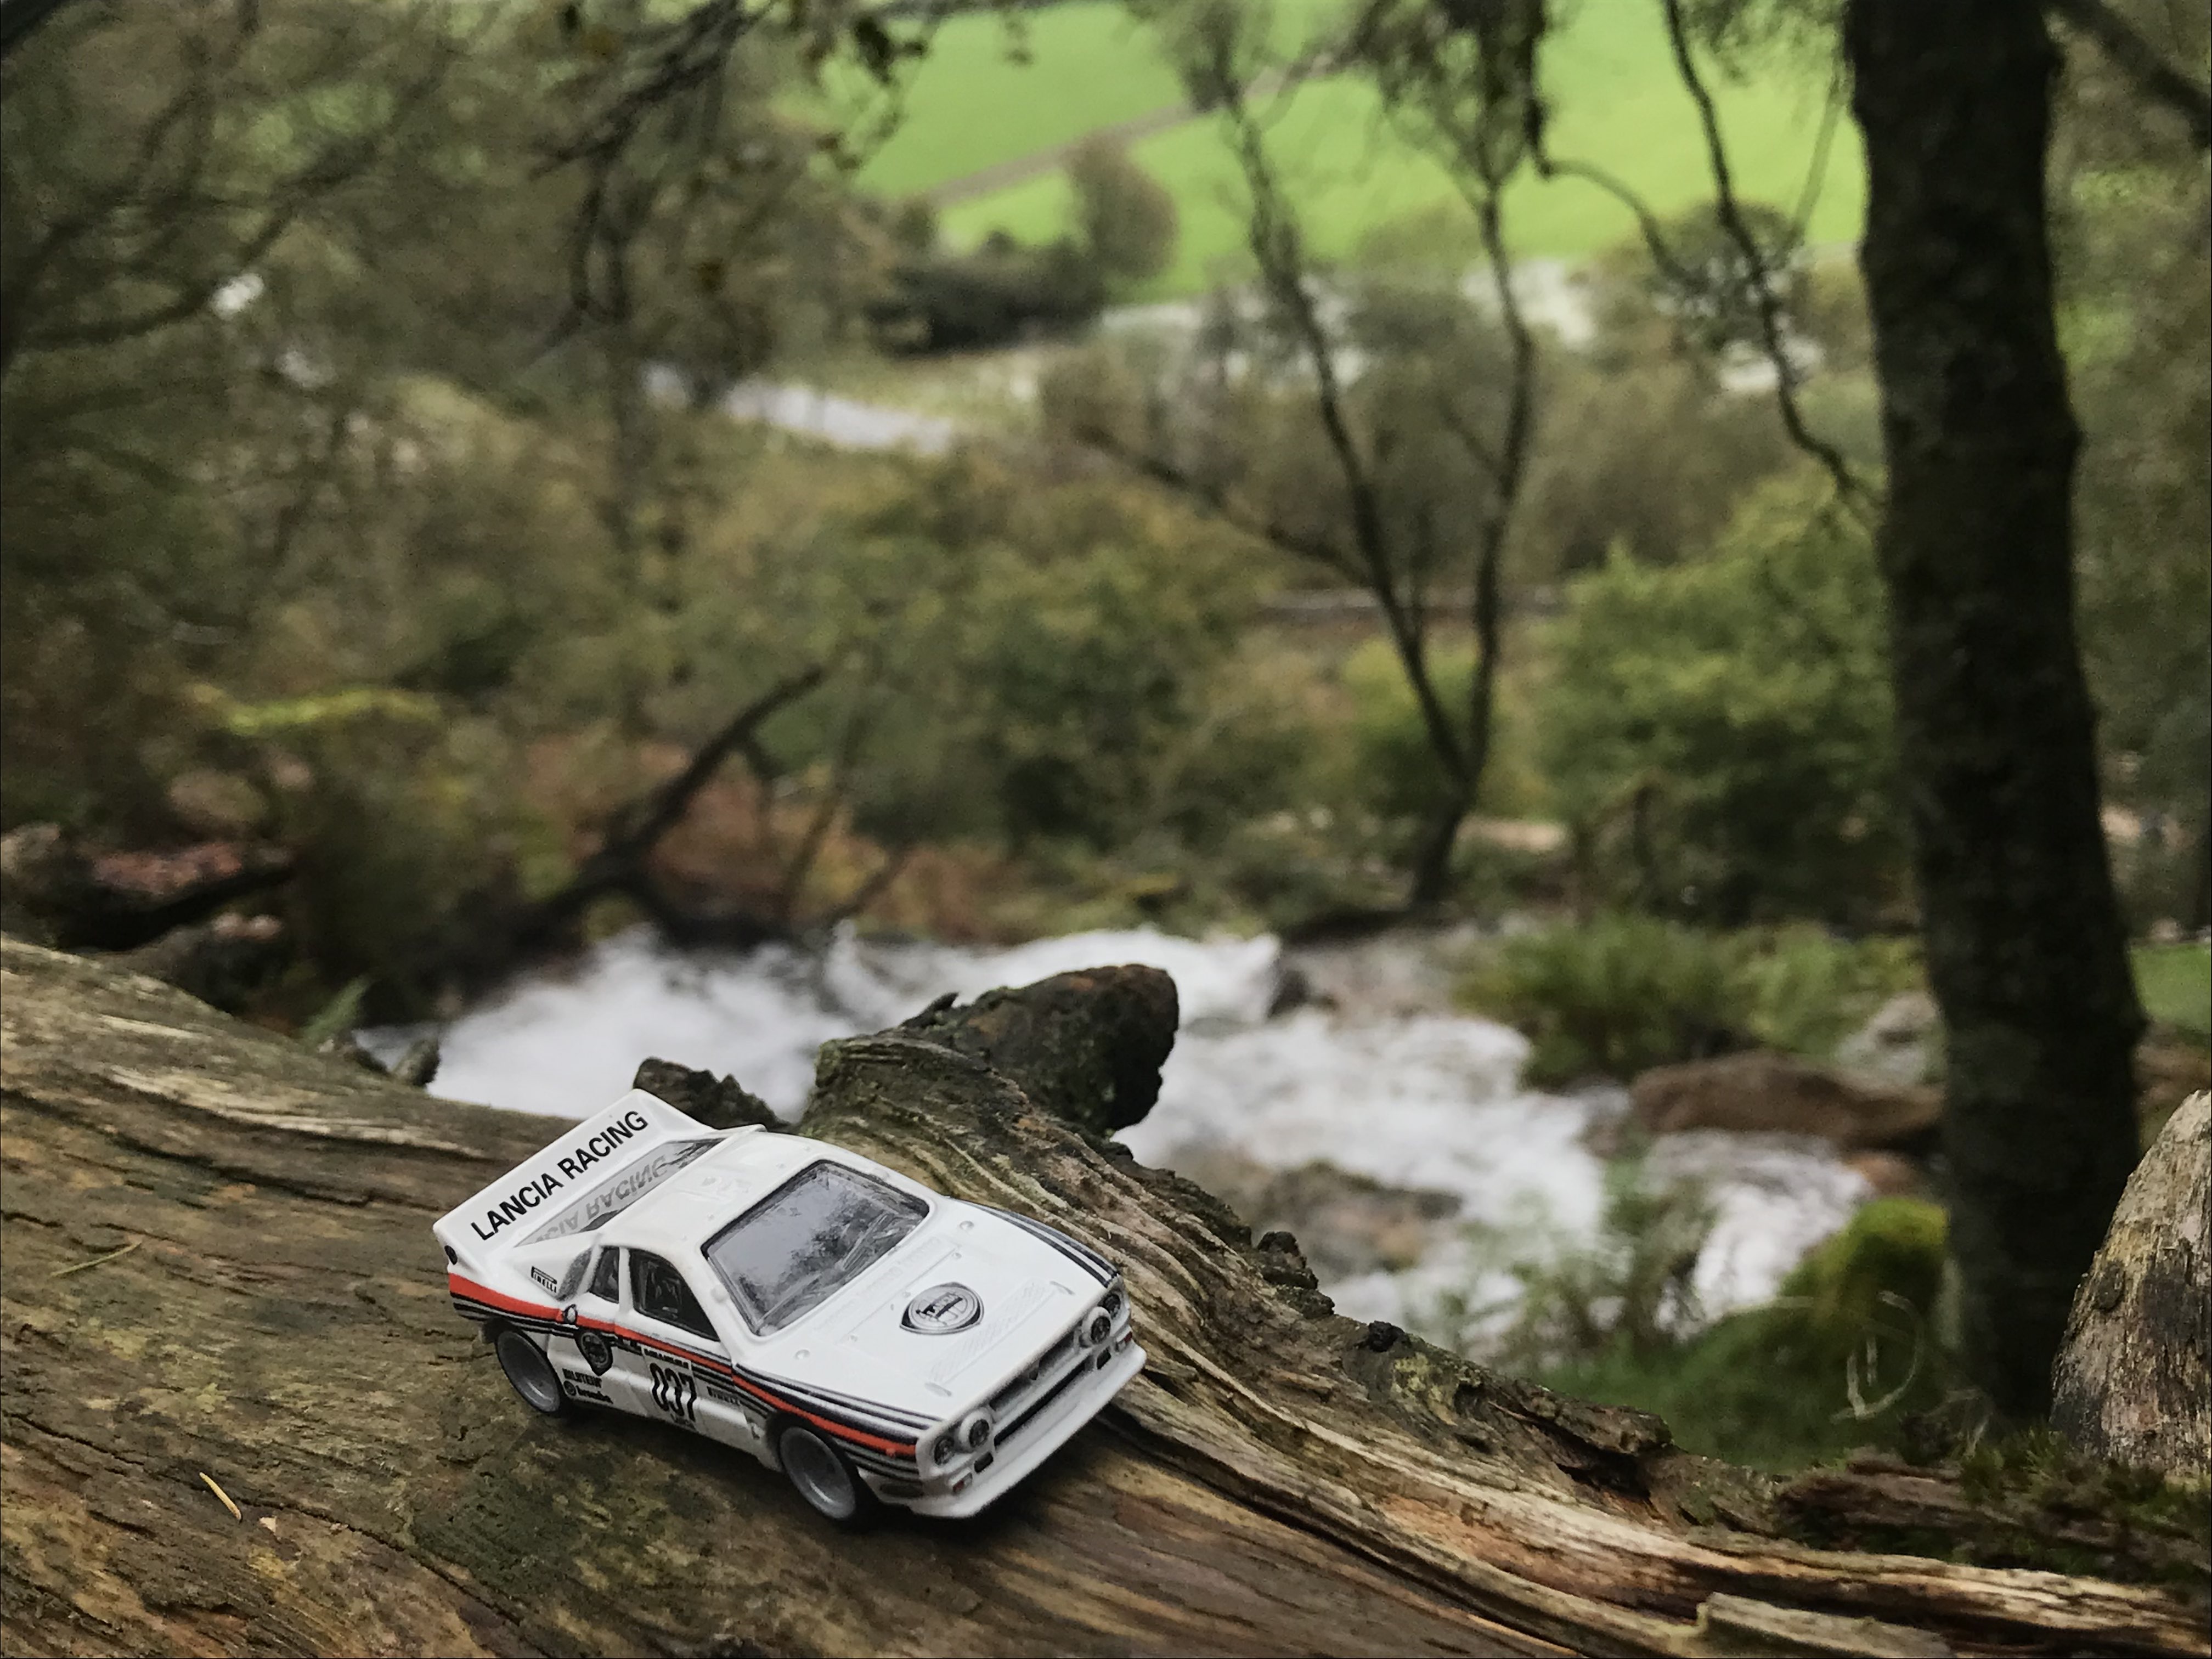 Hotwheels GrpB  Rally Lancia 037 driving along some wood, with waterfall in the background [GTA 3 Theme]